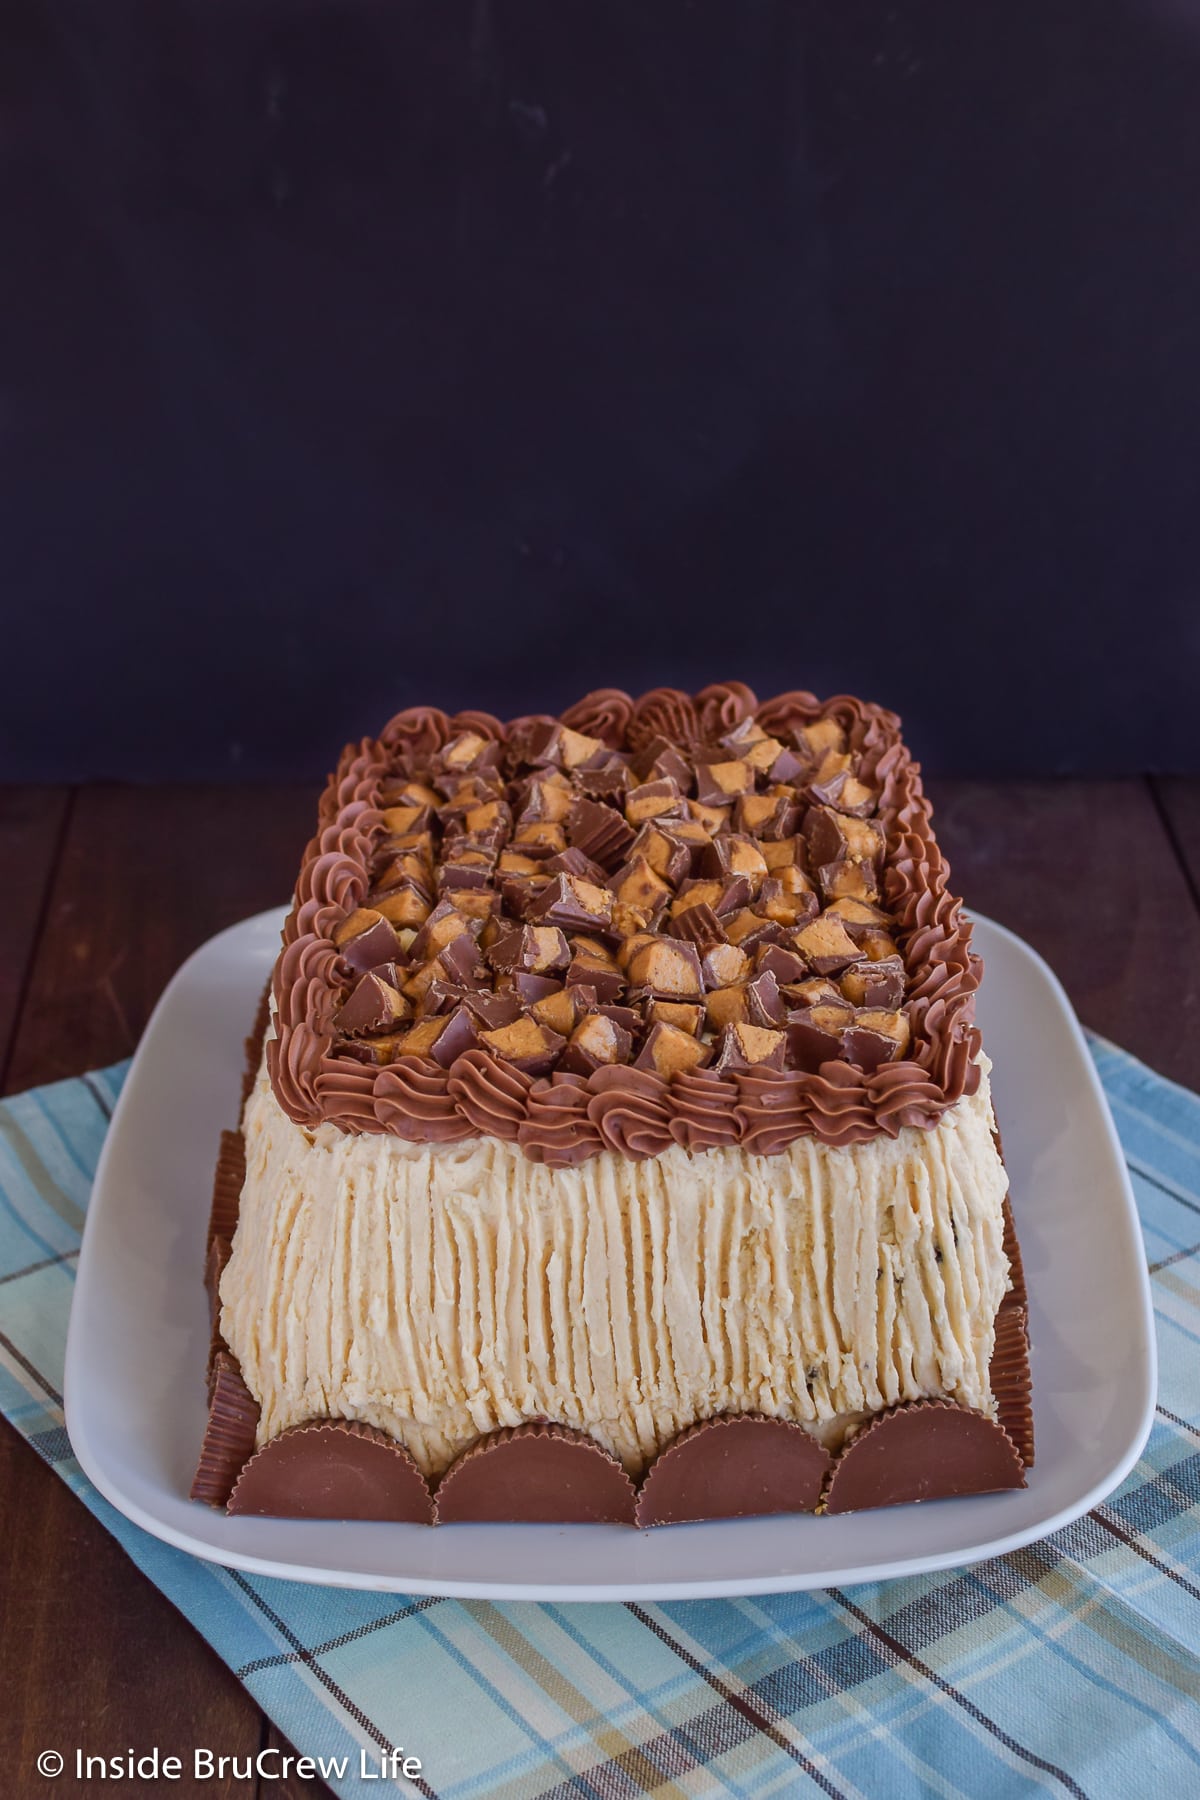 A frosted cake on a plate with chopped peanut butter candies on top.